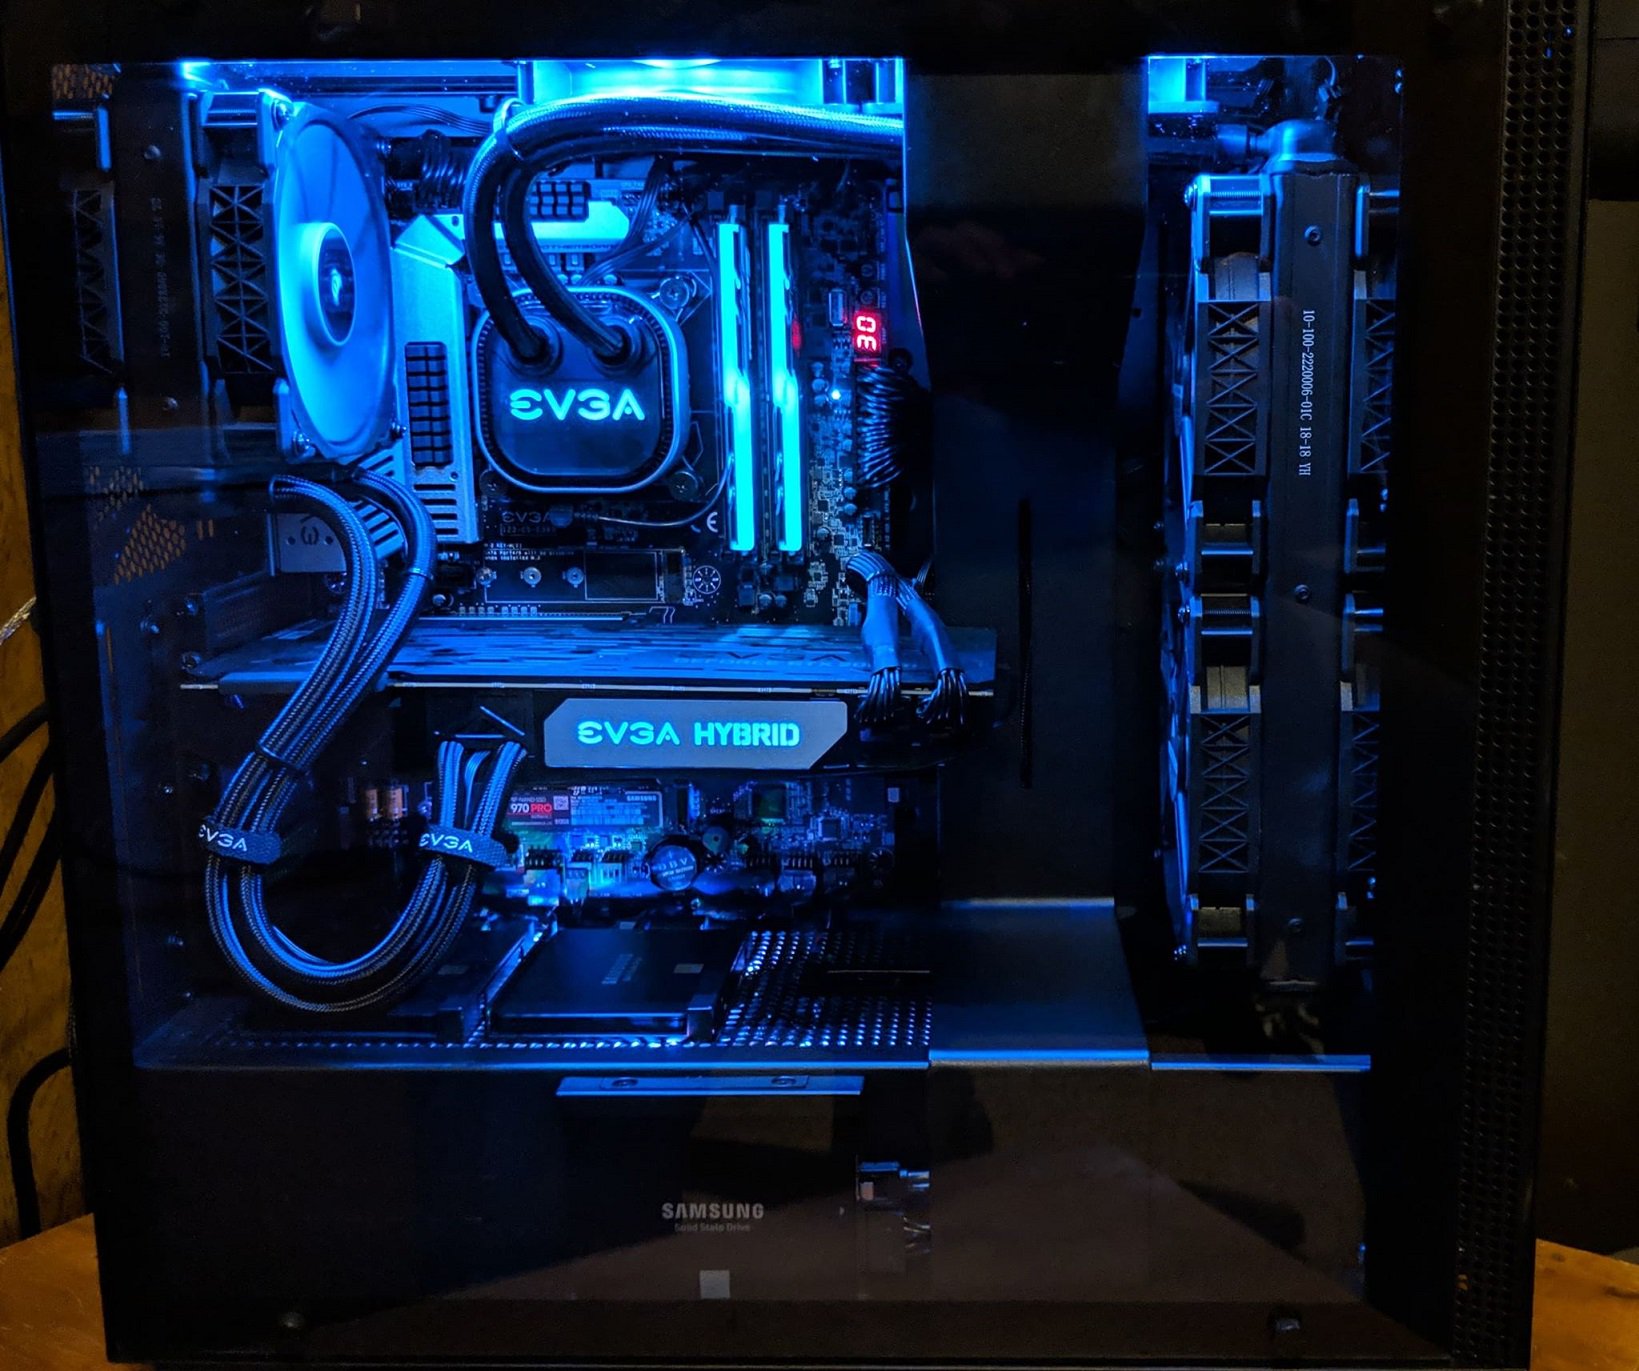 Bløde let plejeforældre EVGA on Twitter: "Featured on today's #ModsRigsMonday! Check out this cool  system called "EVGA Z390" by streetglide420. Feat: EVGA @IntelGaming Z390  FTW, EVGA @NVIDIAGeForce RTX 2080 Ti FTW3 ULTRA Hybrid, 1000G3 PSU,